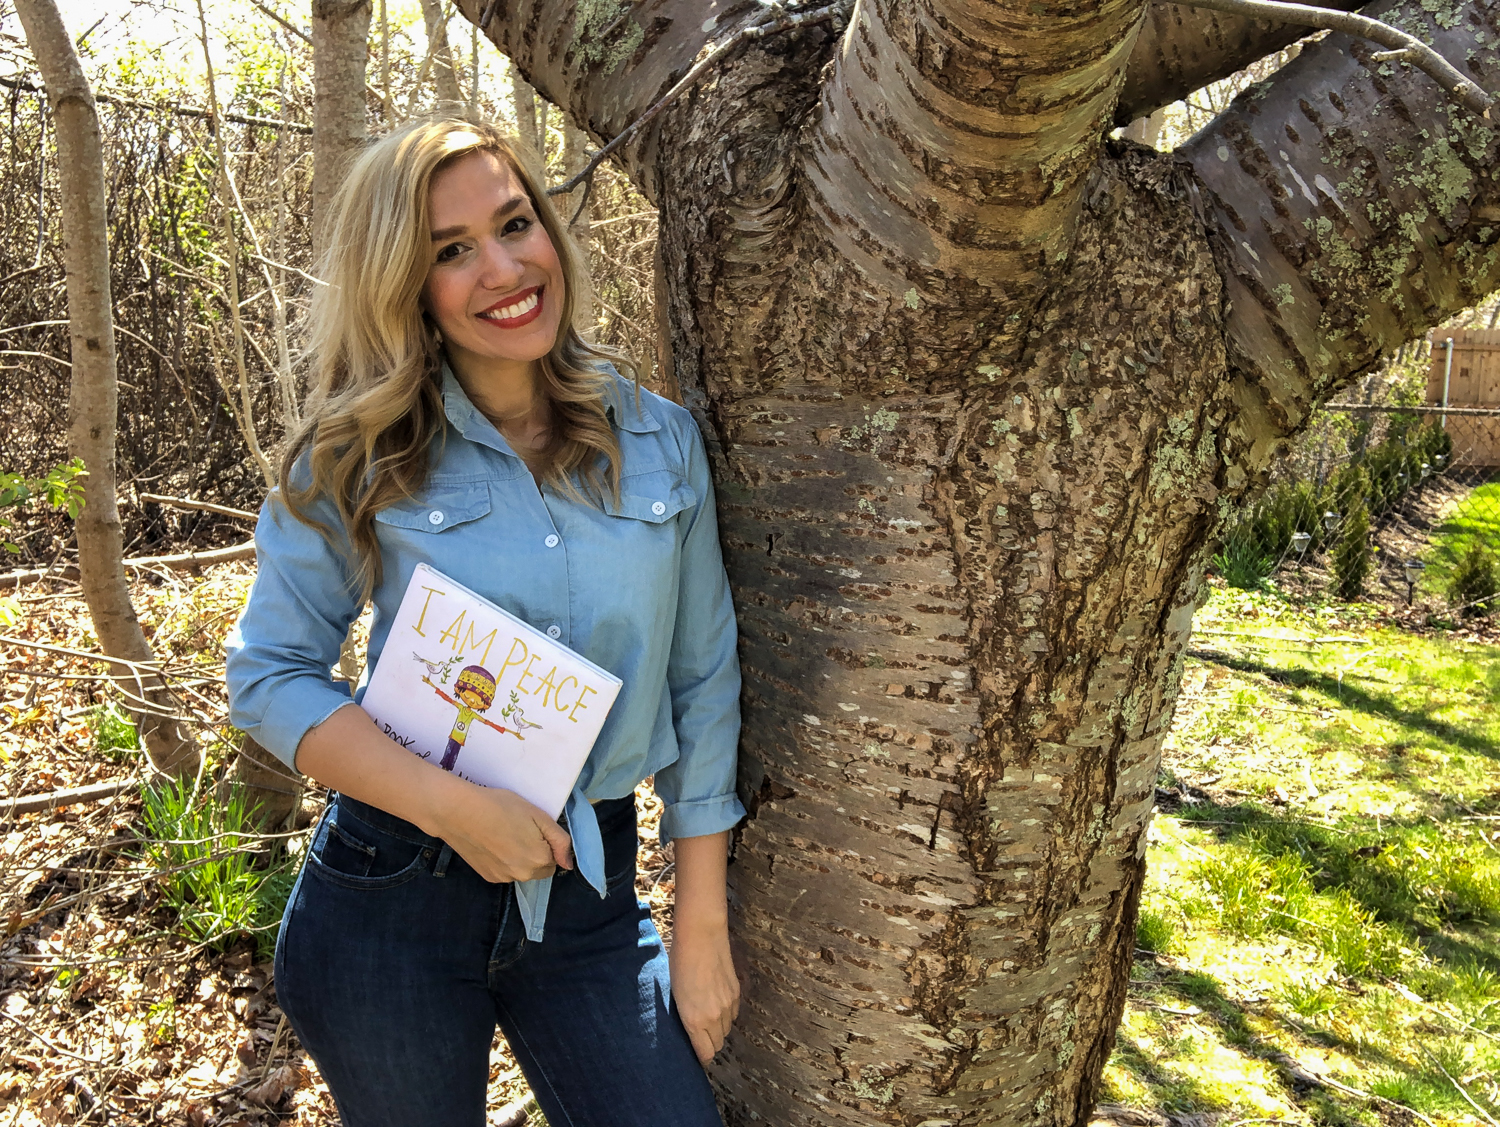 Katelyn Twardzik holding a children's book and leaning against a tree.